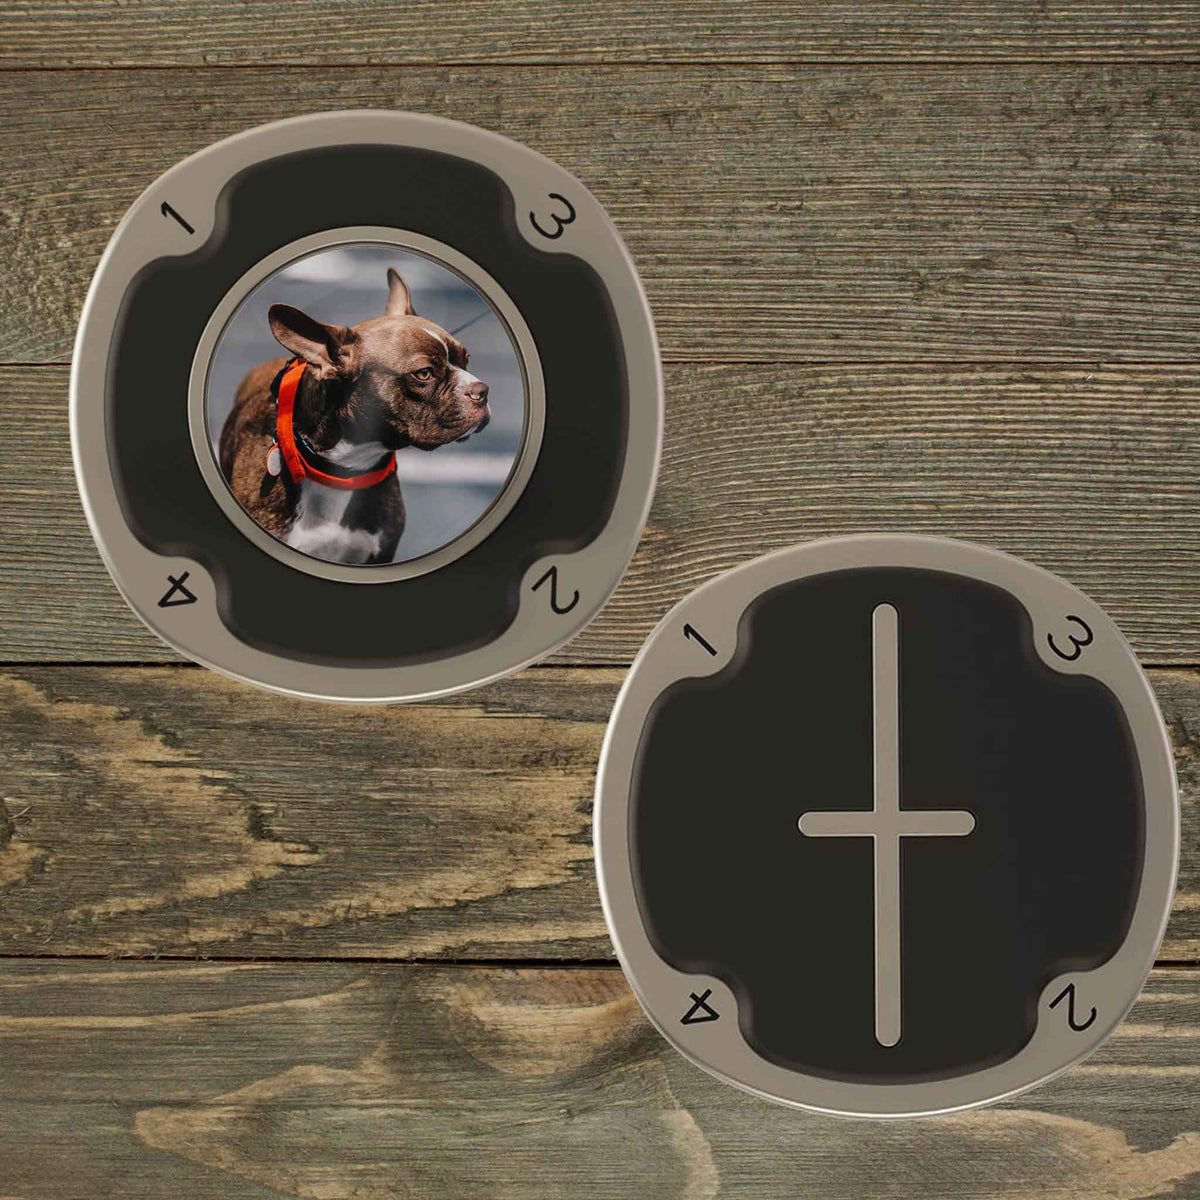 Personalized PitchFix MultiMarker Tool | Custom Ball Markers | Golf Gifts | Custom Photo Pet